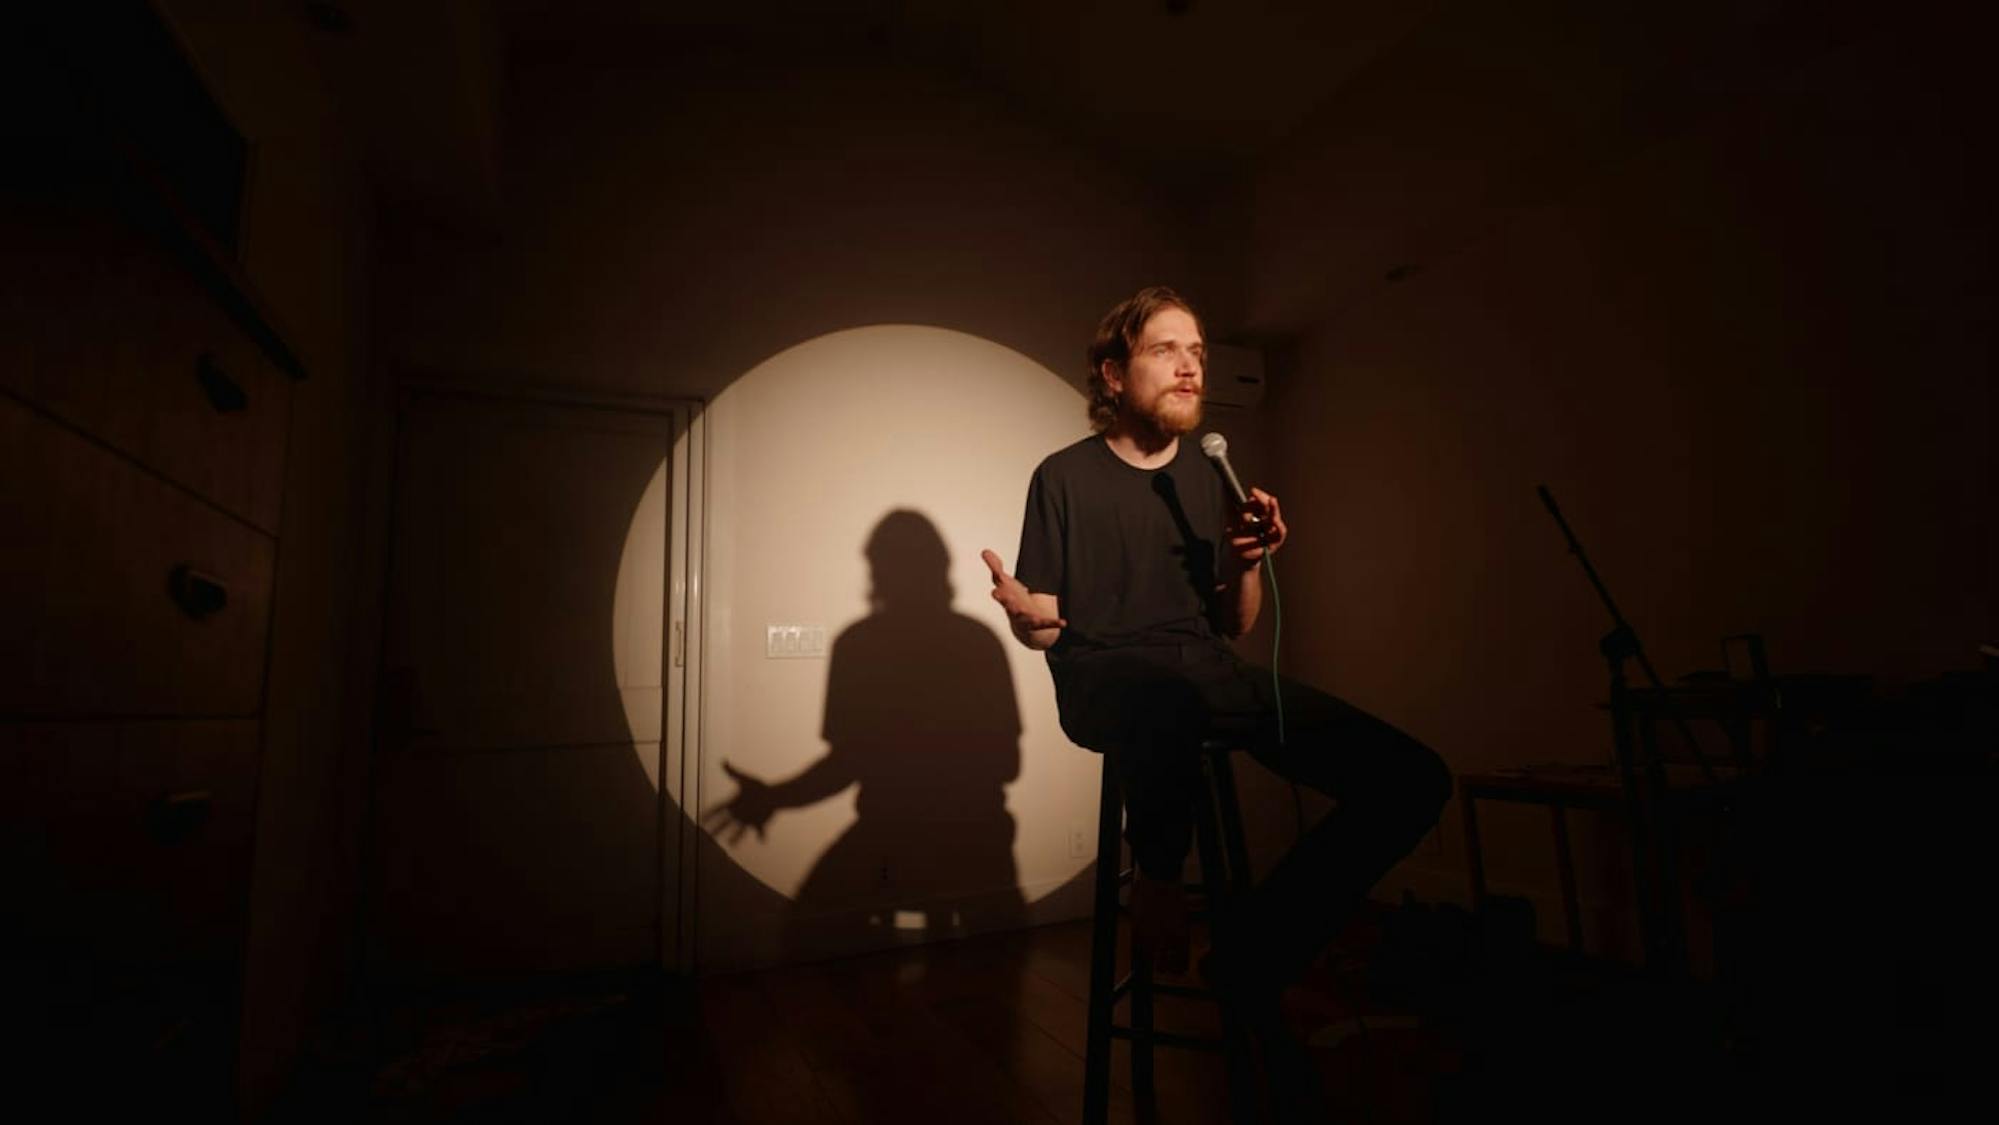 Bo Burnham sits on a stool with a single spotlight. He wears all black, and speaks into a microphone. Because the rest of the shot is dark it’s difficult to ascertain what else is in the room